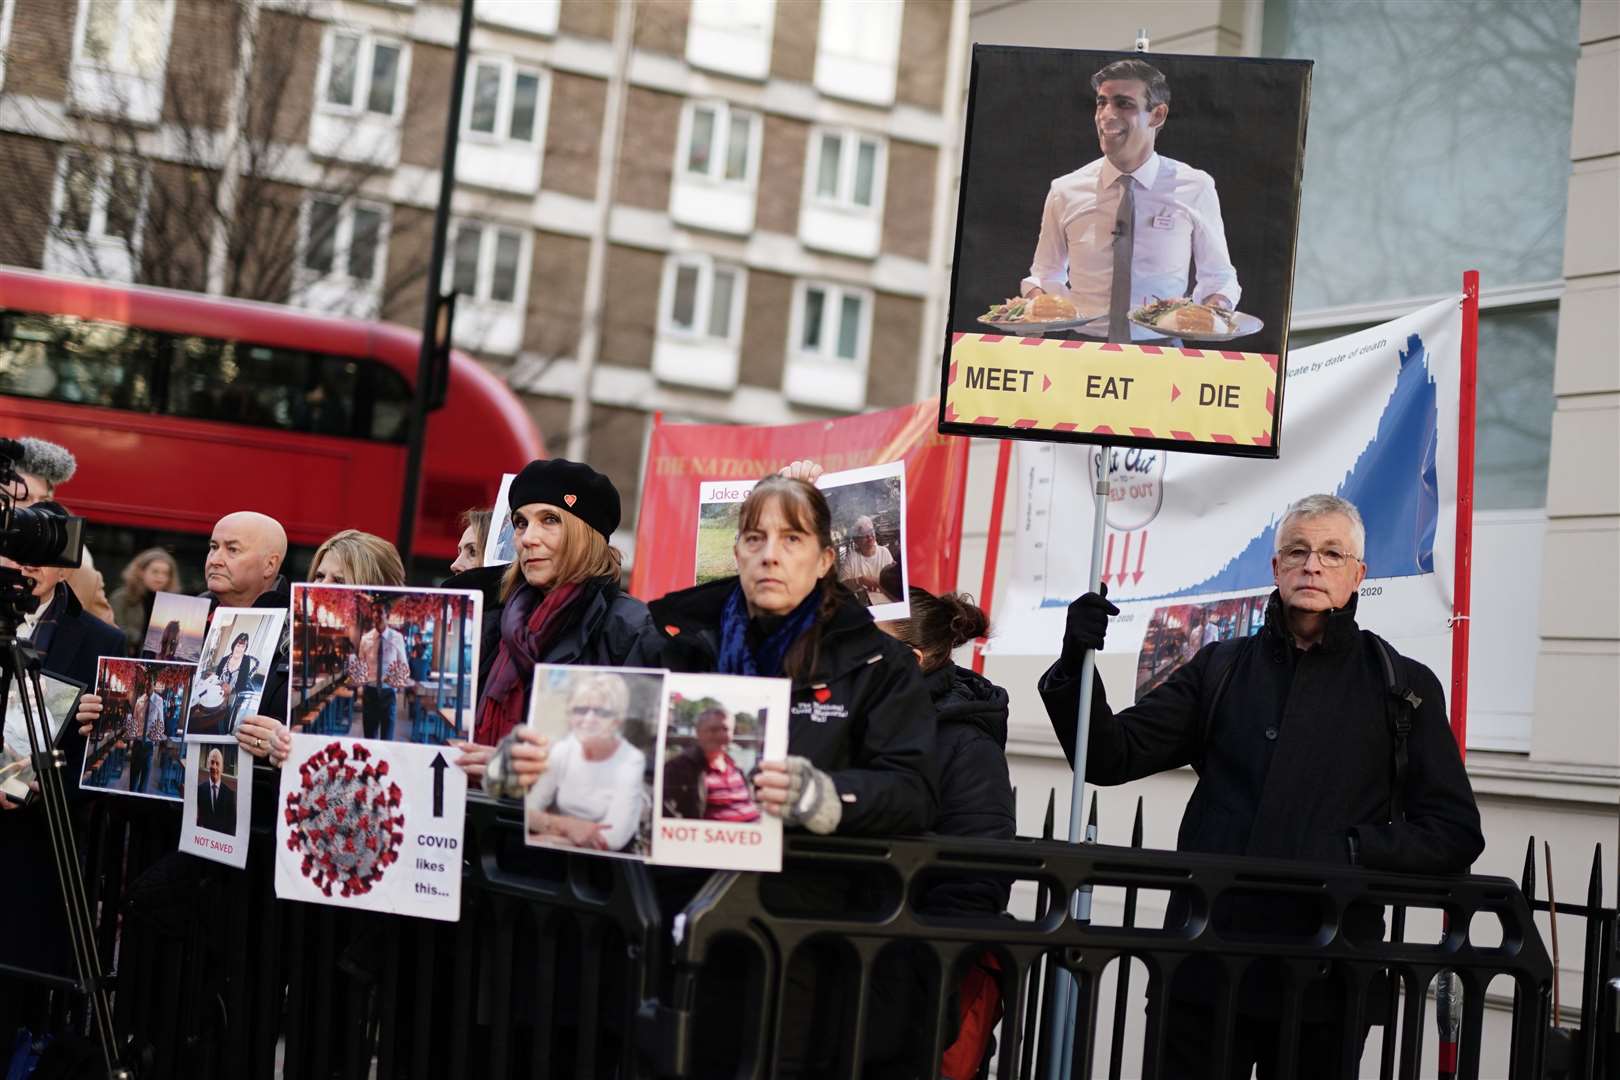 Protesters outside the UK Covid-19 Inquiry at Dorland House in London, where Prime Minister Rishi Sunak was giving evidence (Jordan Pettitt/PA)